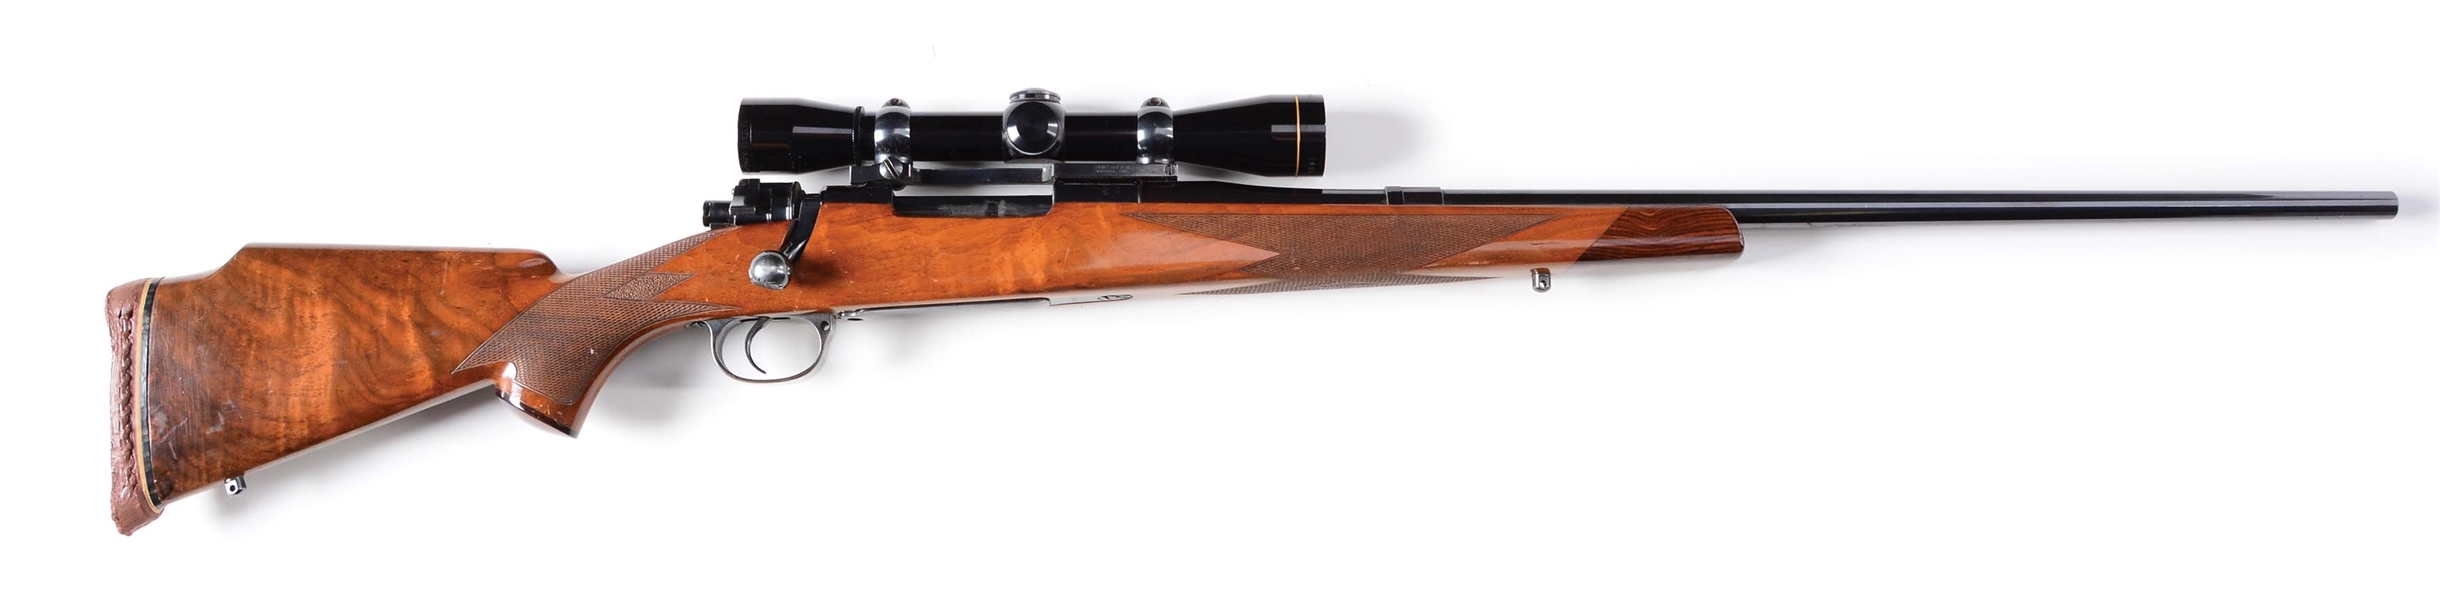 (C) CUSTOM MAUSER 98 BOLT ACTION RIFLE BY FRED WELLS WITH SCOPE. 